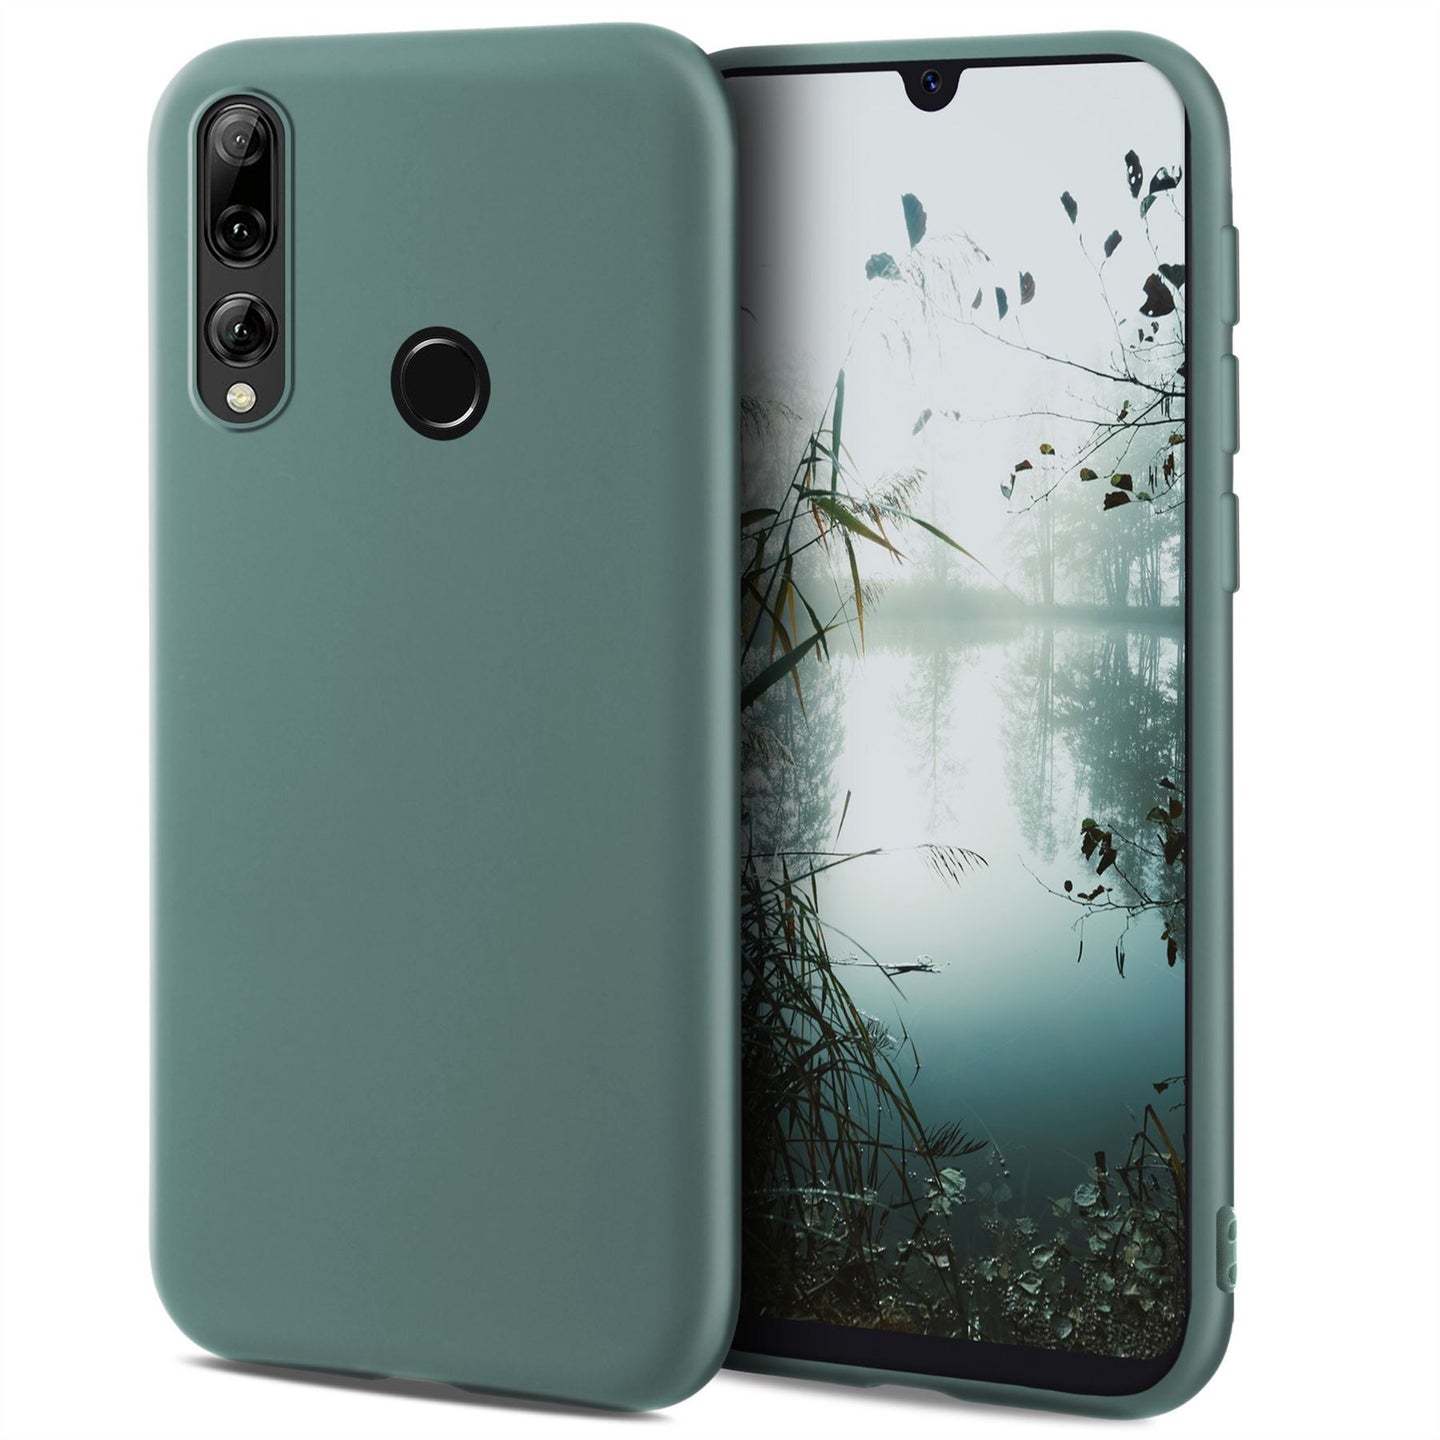 Moozy Minimalist Series Silicone Case for Huawei P Smart Plus 2019 and Honor 20 Lite, Blue Grey - Matte Finish Slim Soft TPU Cover